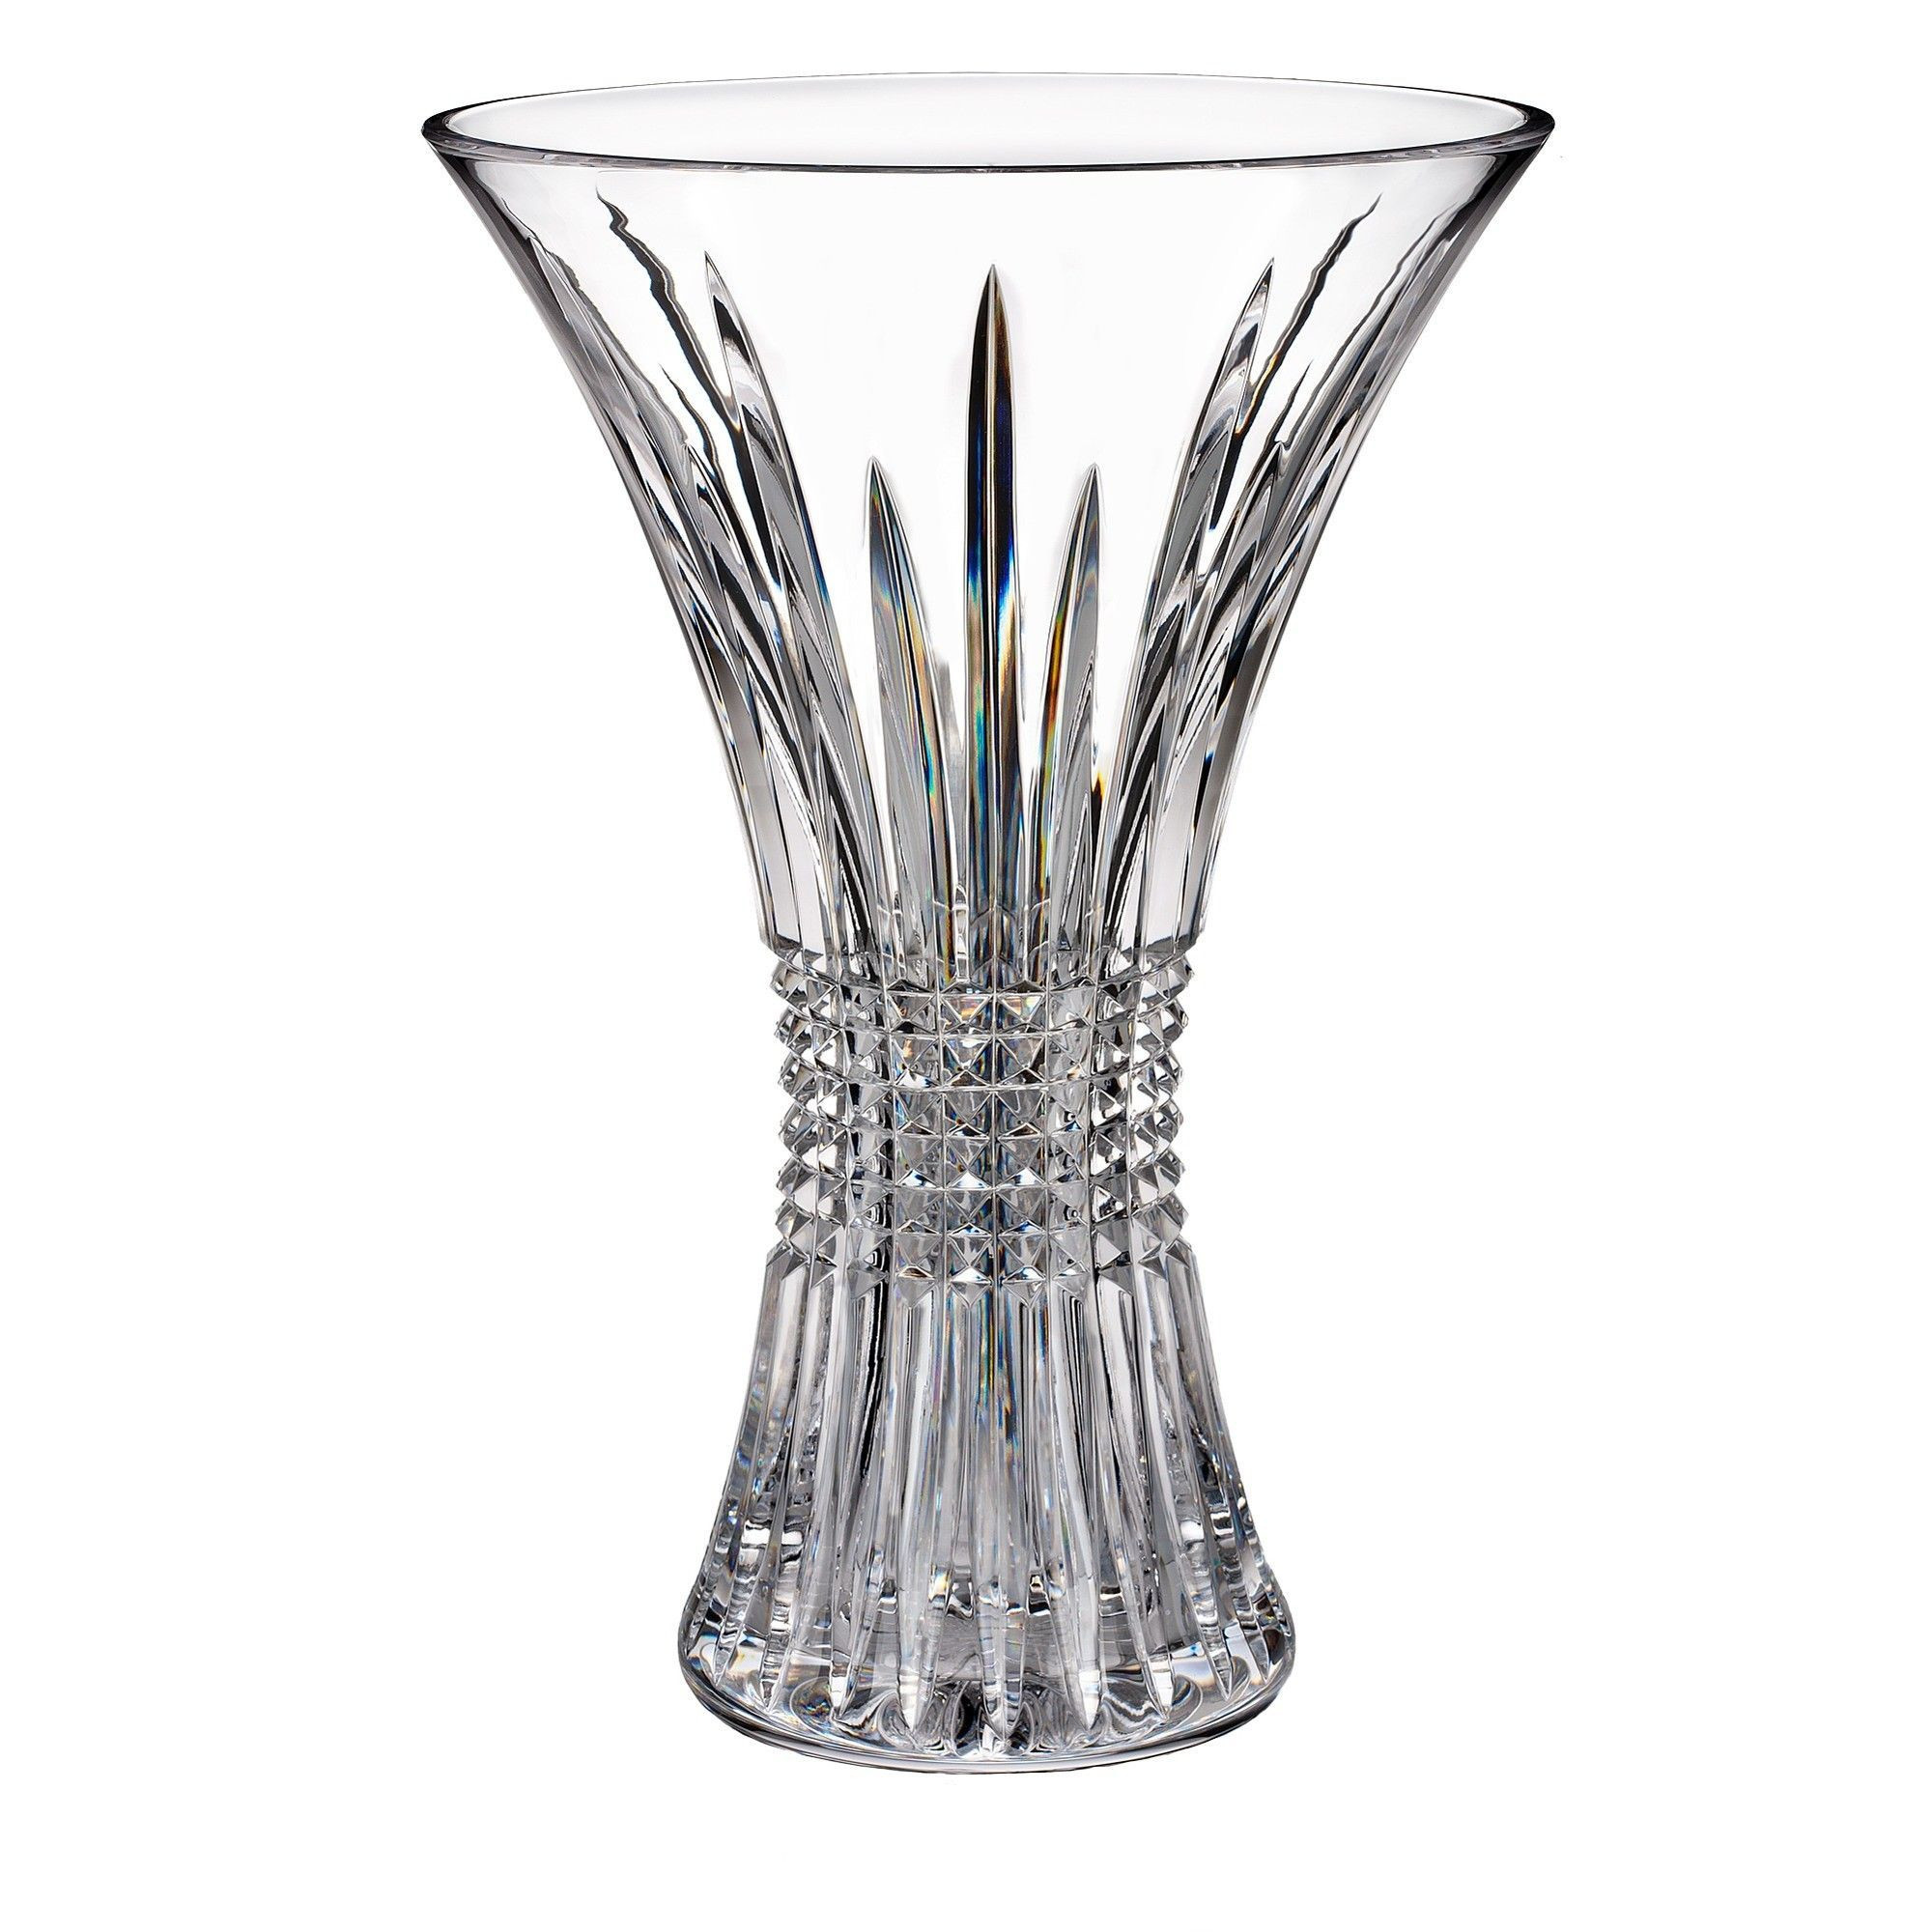 17 Elegant Waterford Crystal Vase 14 Inch 2024 free download waterford crystal vase 14 inch of lismore diamond vase for 213209d81145b837ad8020d8f4c74a3e